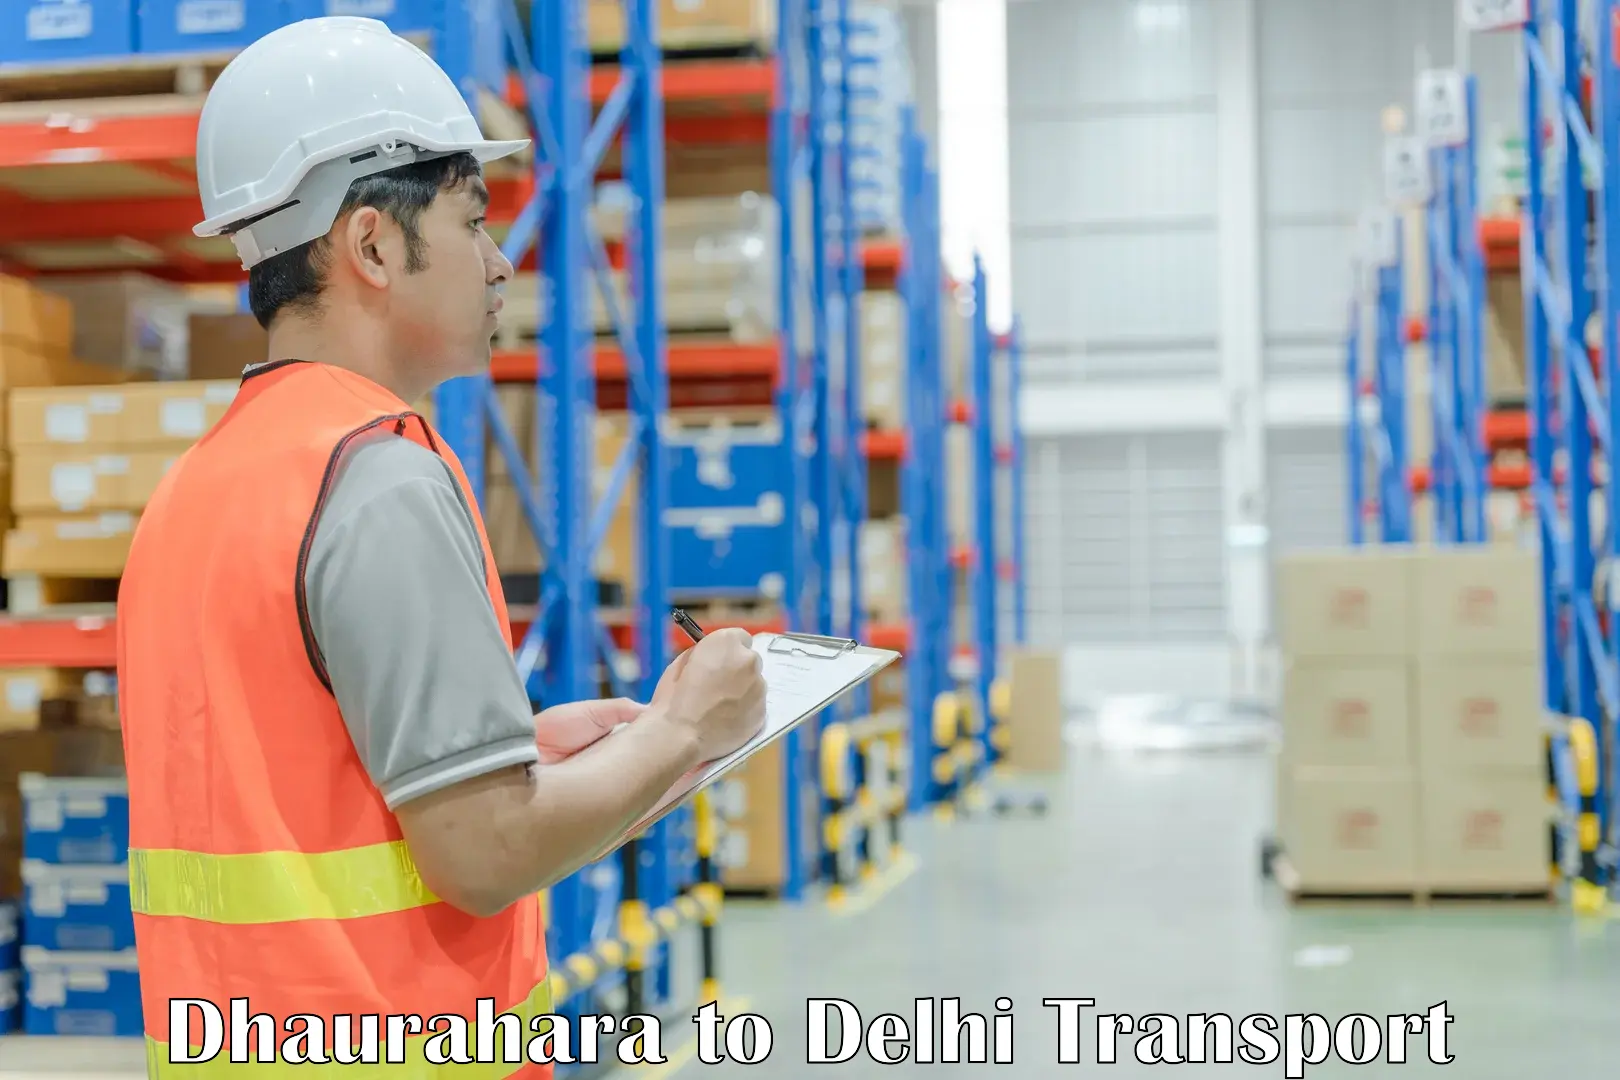 Interstate transport services in Dhaurahara to University of Delhi